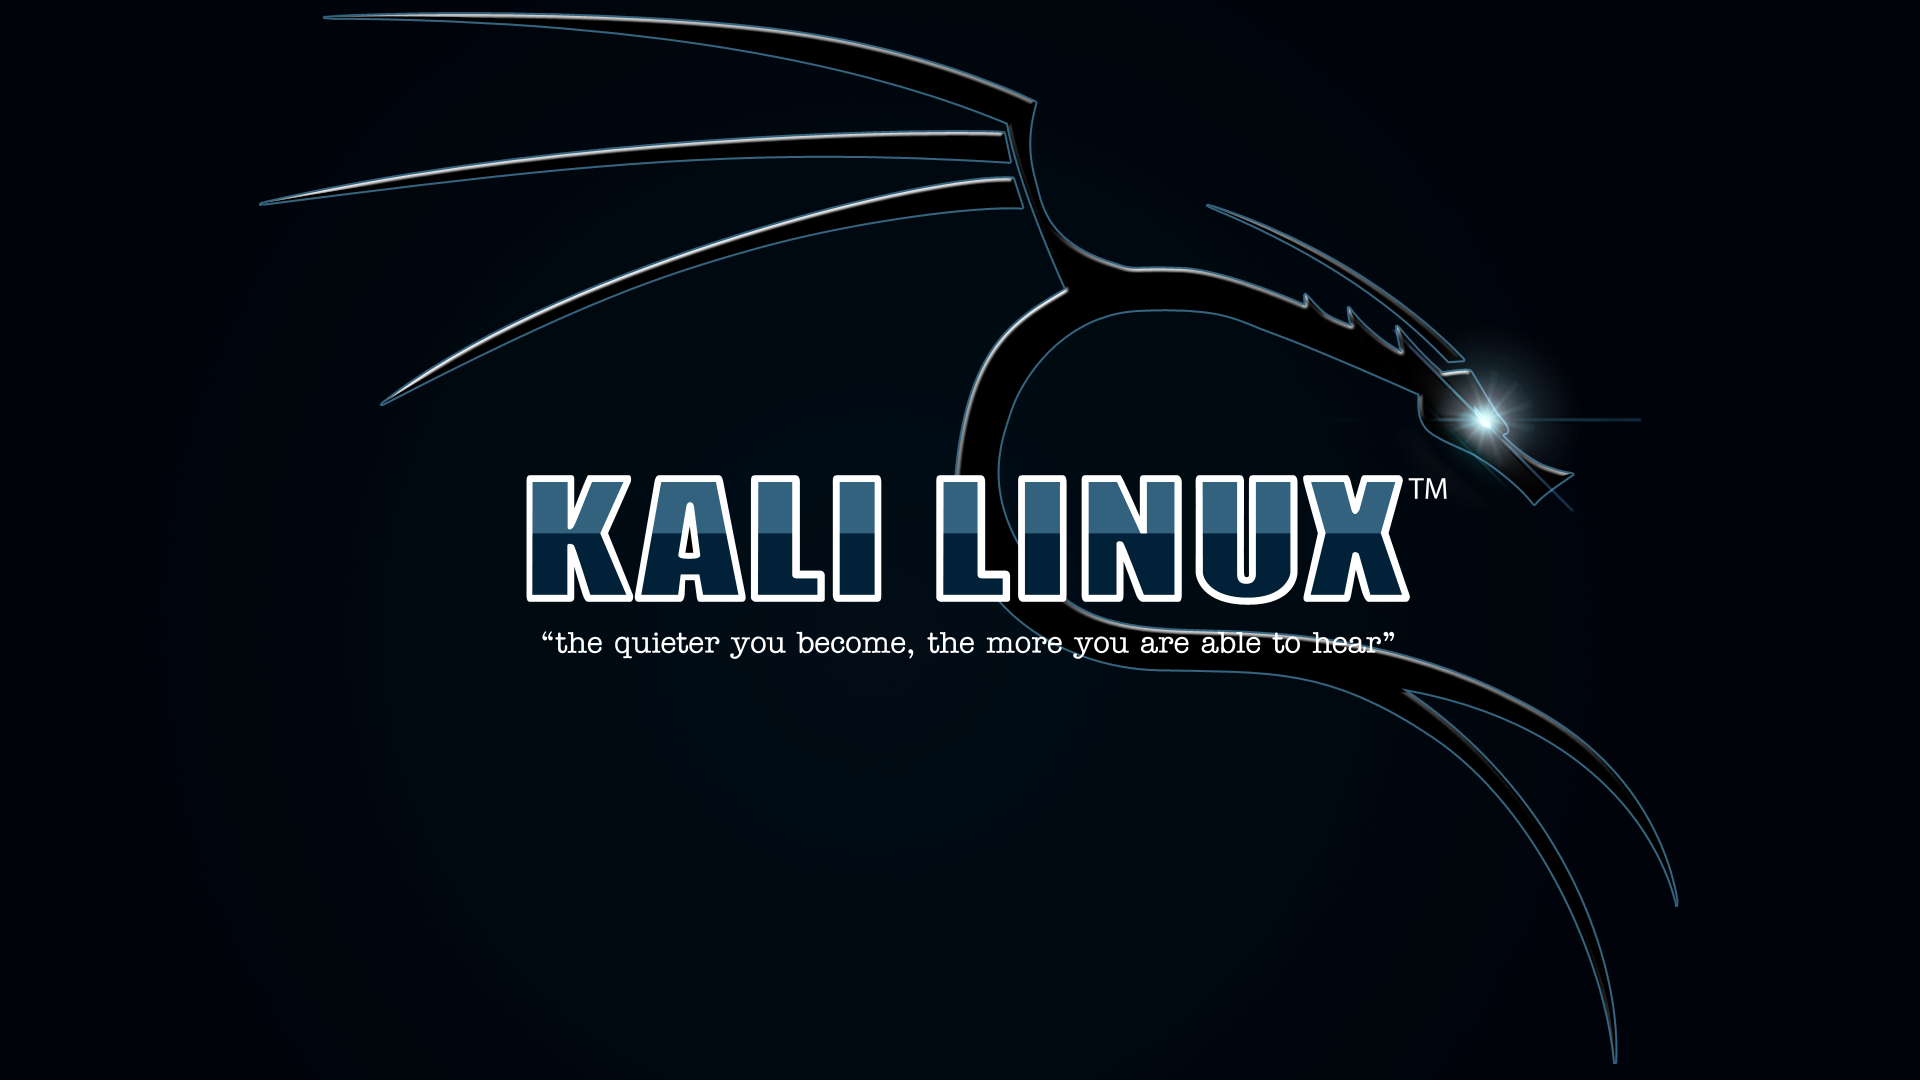 Kali Linux, with its BackTrack lineage, has a vibrant and active community. With active Kali forums, IRC Channel, Kali Tools listin. Linux, Kali linux hacks, Kali